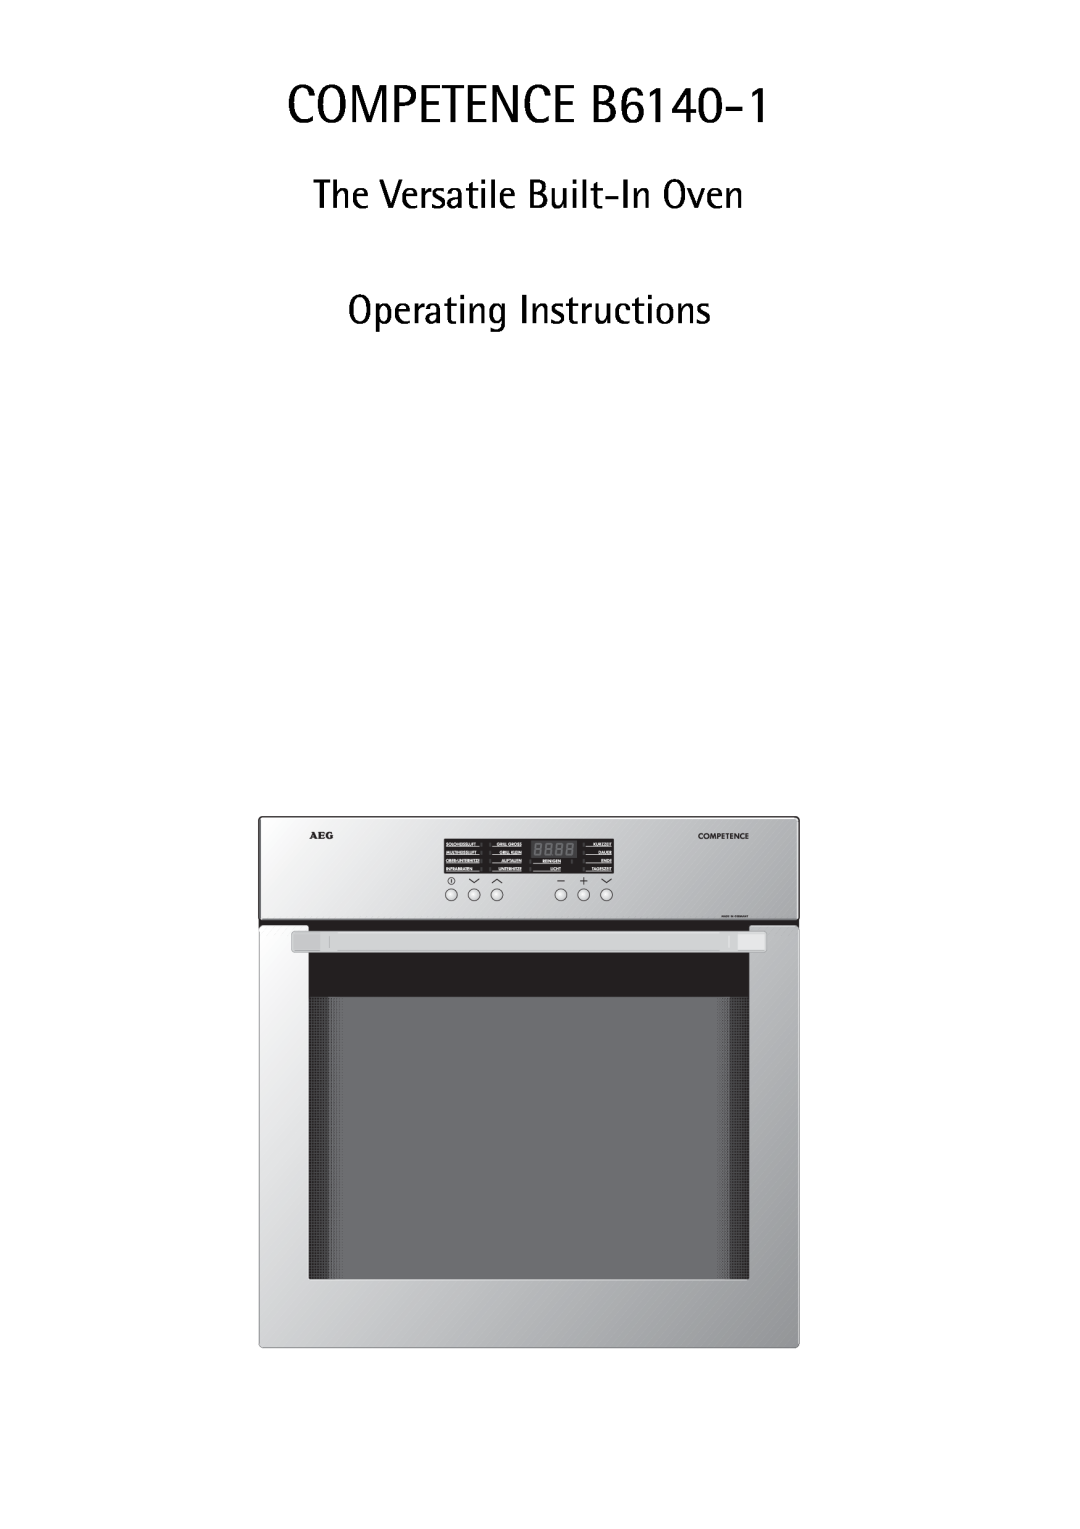 Electrolux manual COMPETENCE B6140-1, The Versatile Built-In Oven Operating Instructions 